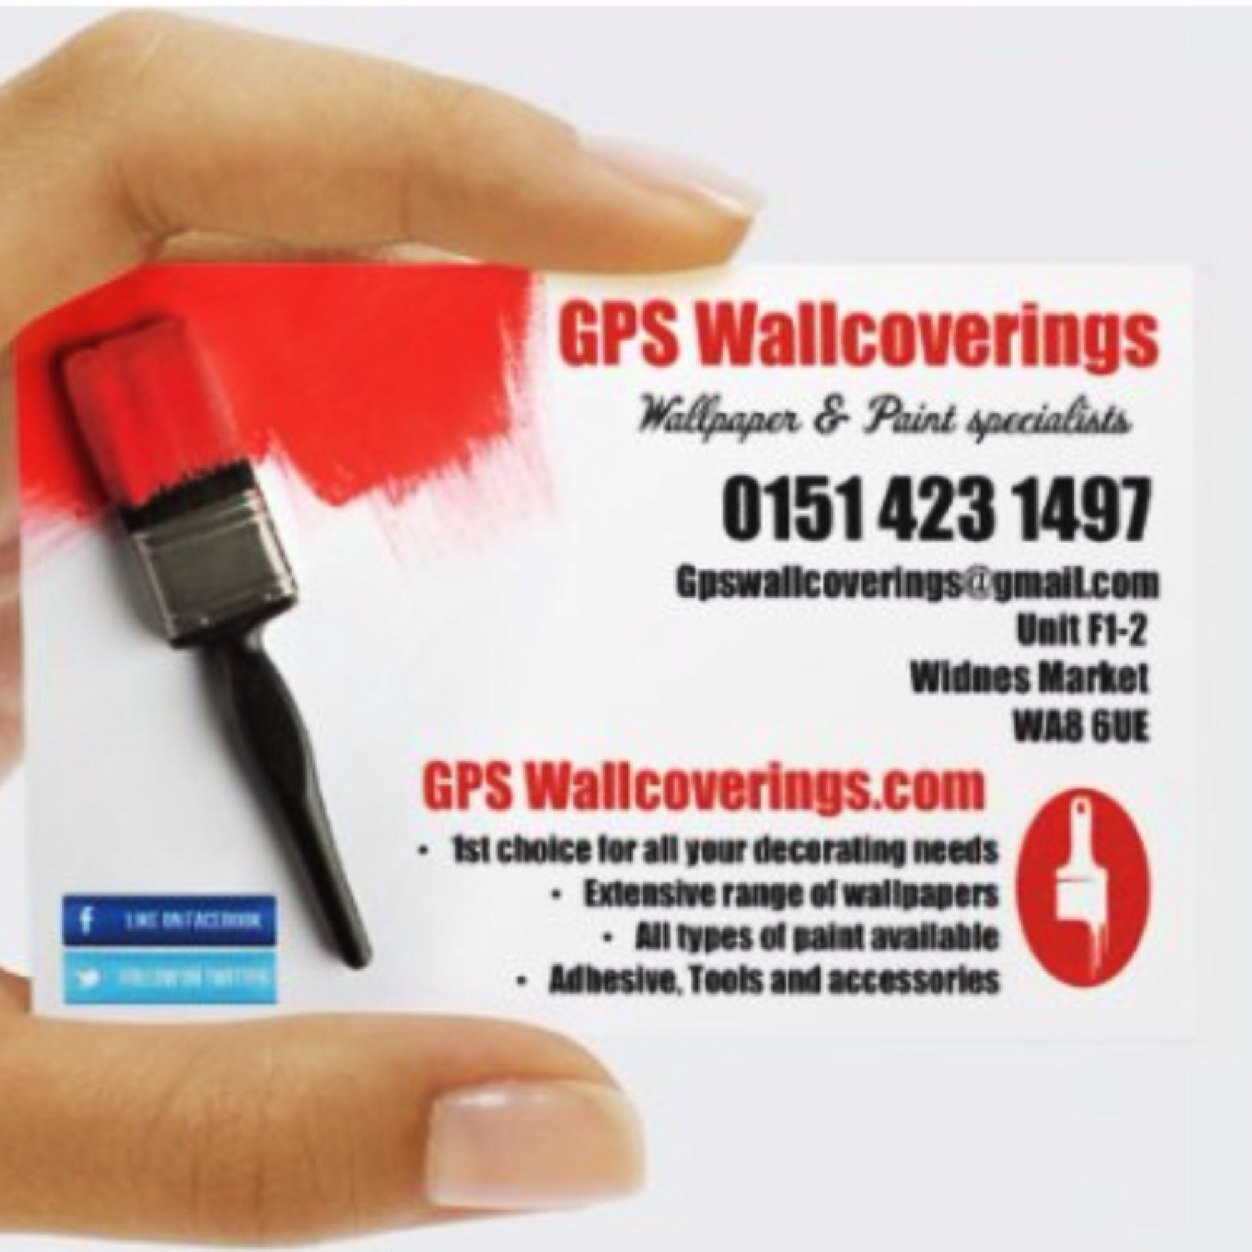 Independant retailers of the finest wallpapers and all other decorating products.

Instagram - GPSWALLCOVERINGS